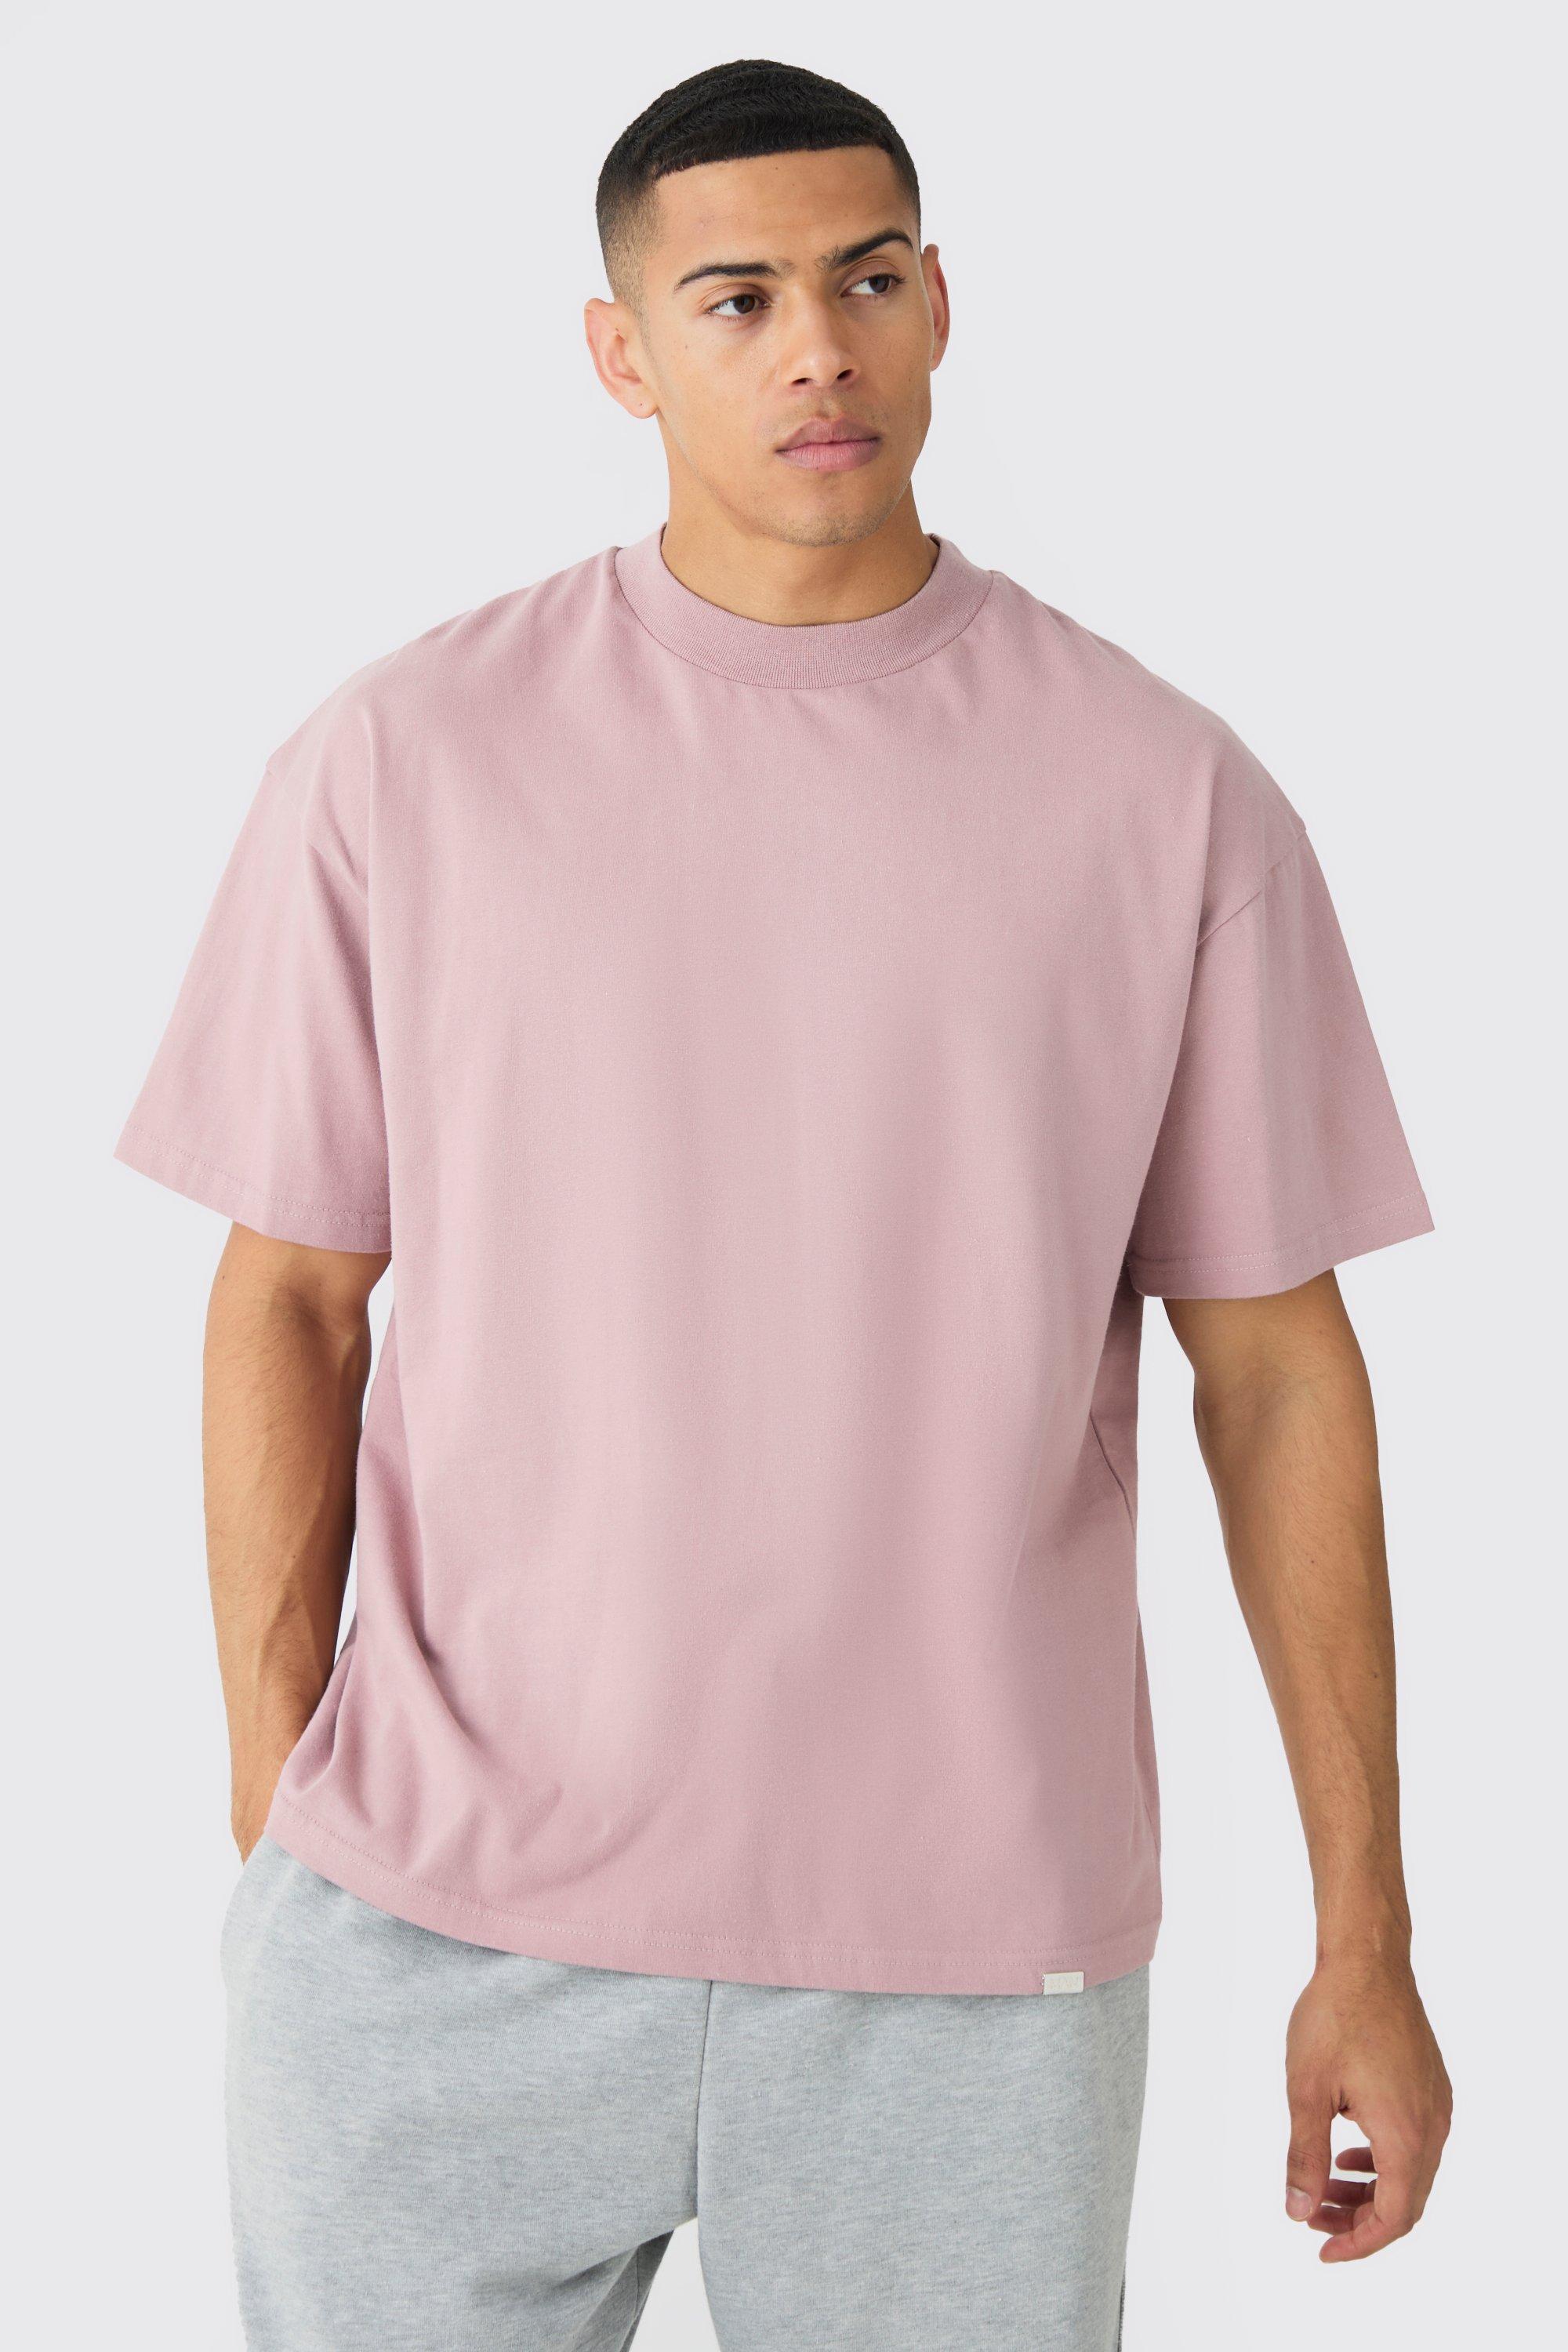 Image of Oversized Extended Neck Boxy Heavyweight T-shirt, Pink